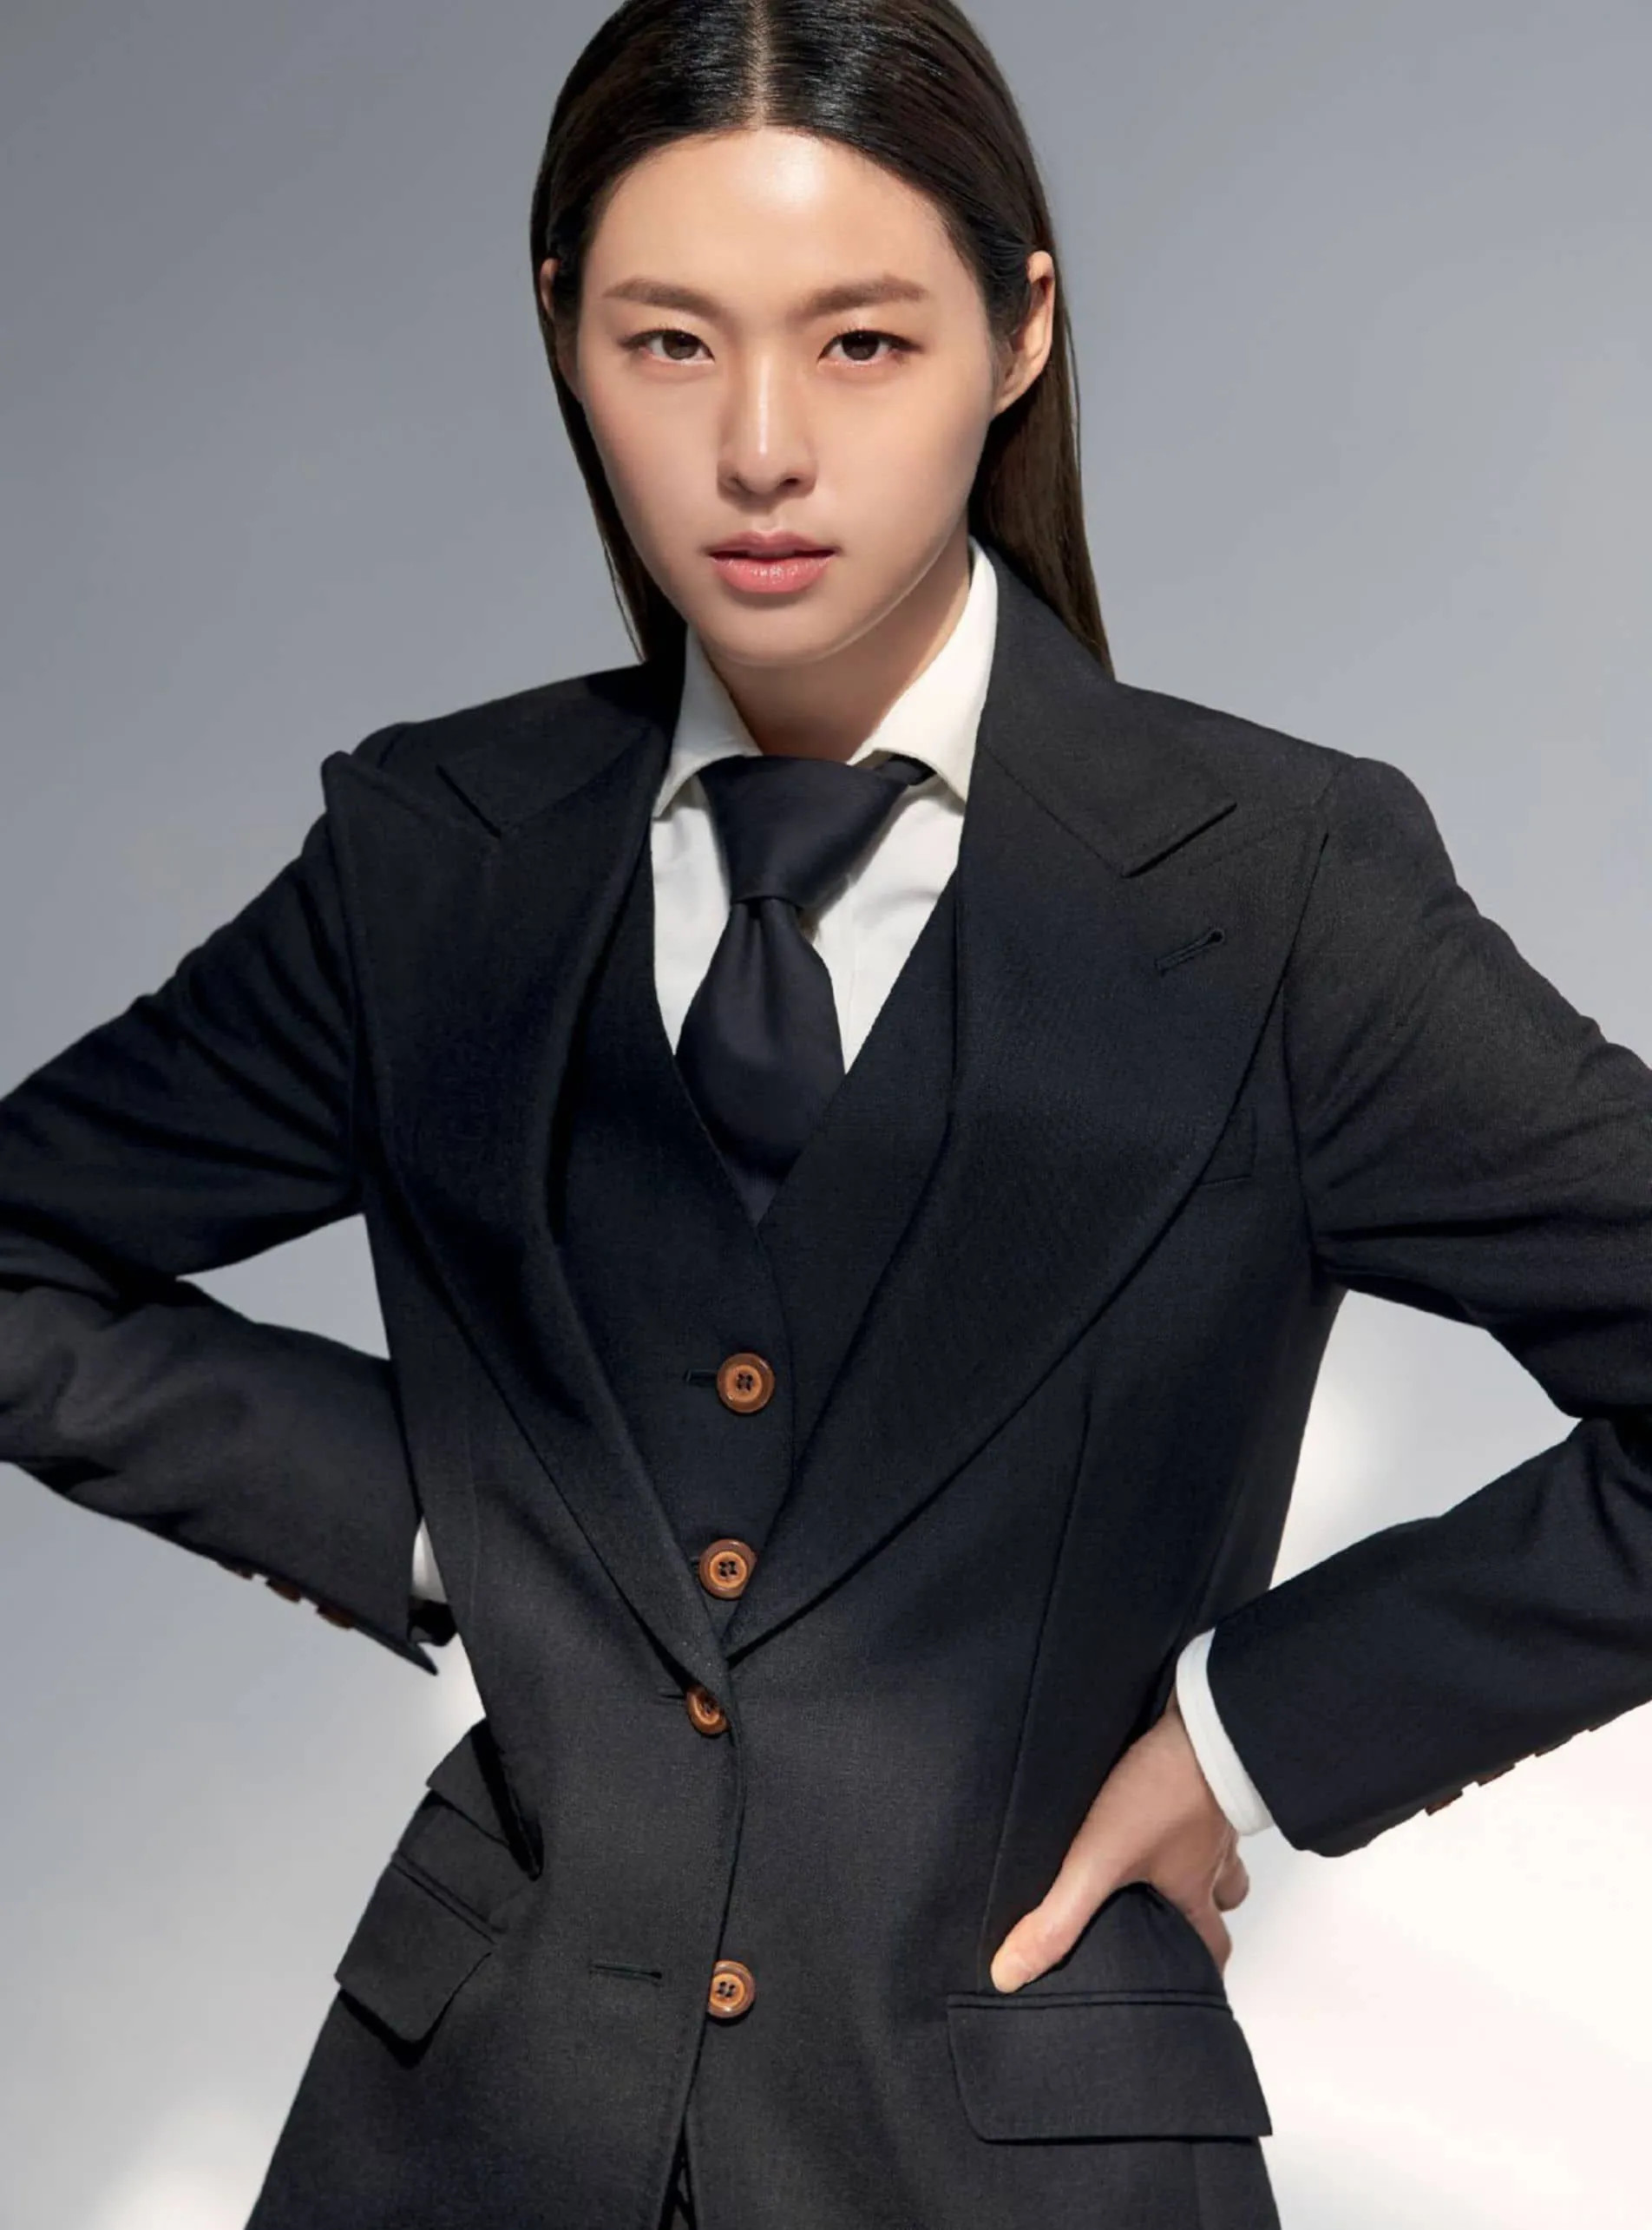 AOA's Seolhyun for PinPrestige April 2020 Issue | Kpopping